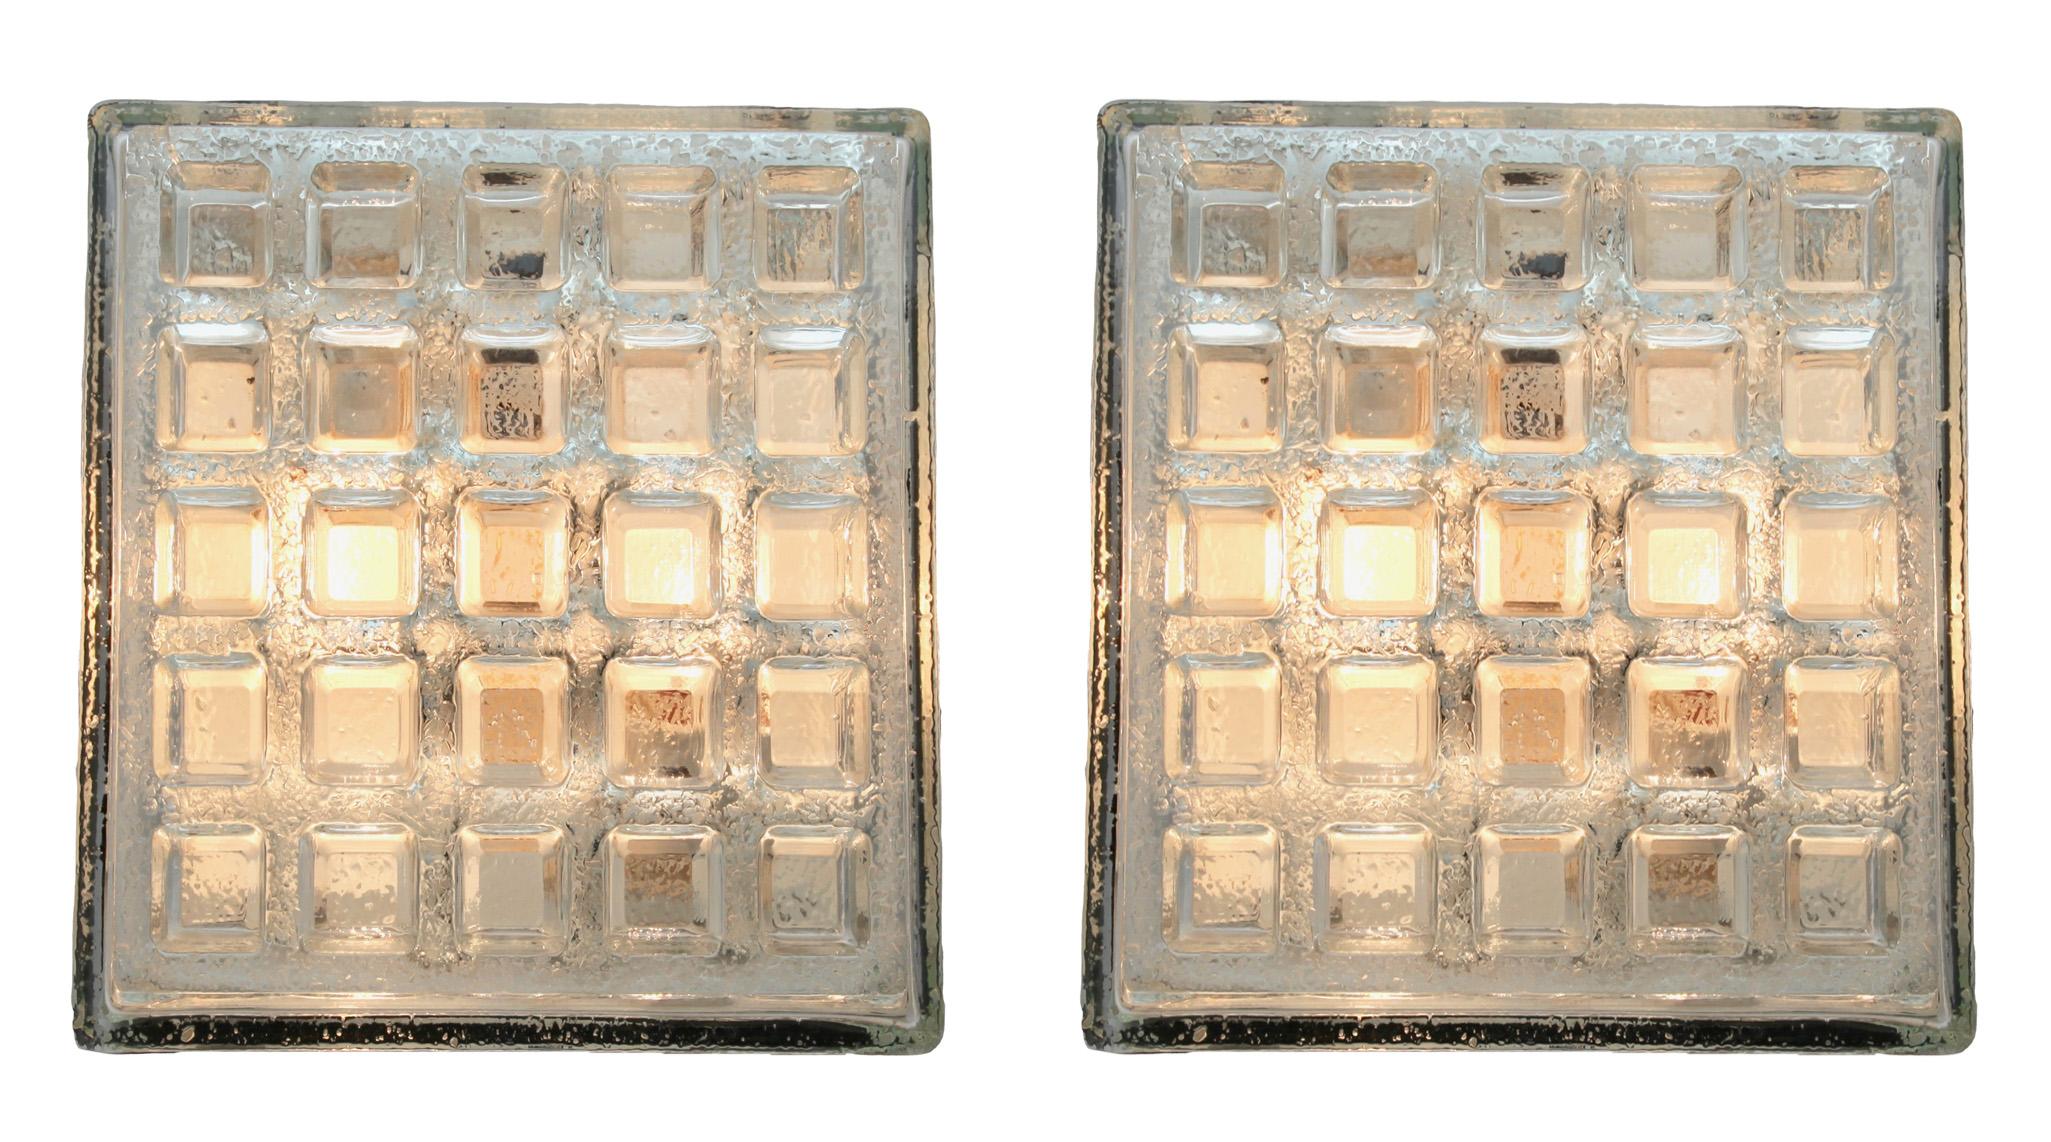 These flat mounting lights were made by the German lighting studio, BEGA, and manufactured in the 1970s. They have an Industrial style and feature a textured square clear glass cover by Glashütte Limburg with a indented grille motif, and are mounted